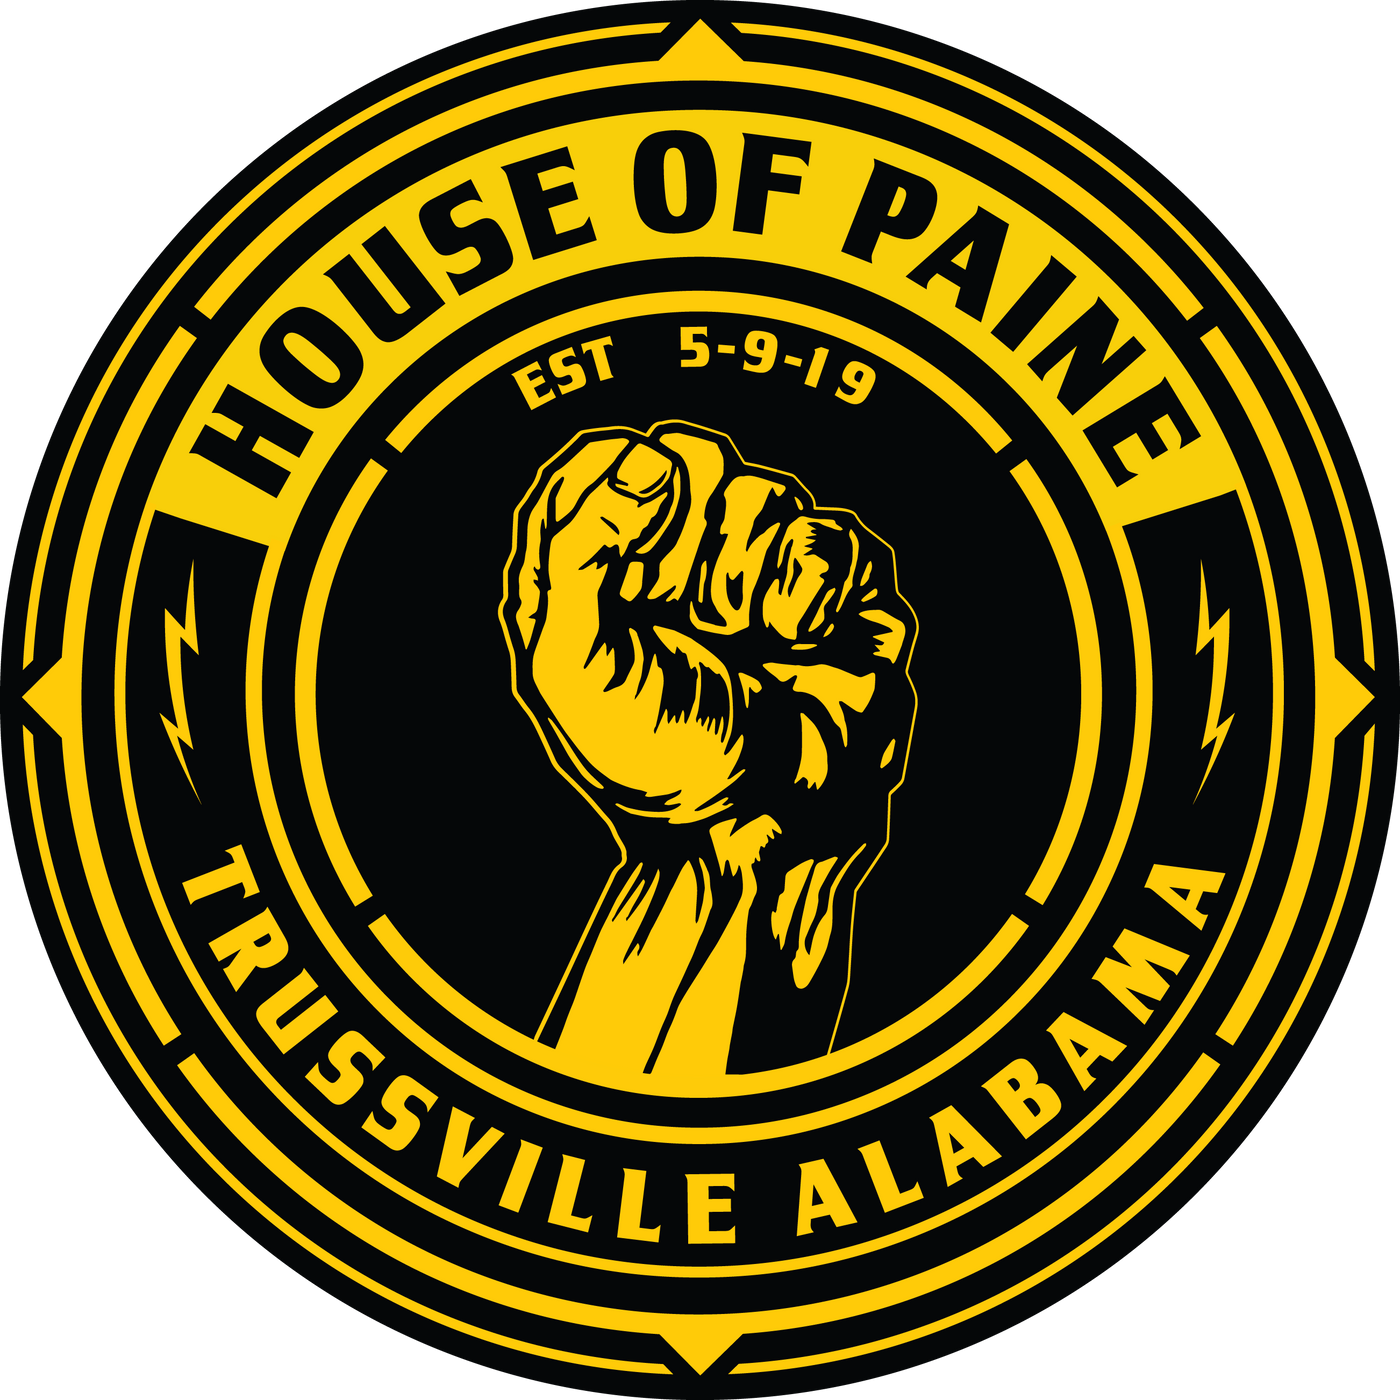 F3 House of Paine Pre-Order March 2021